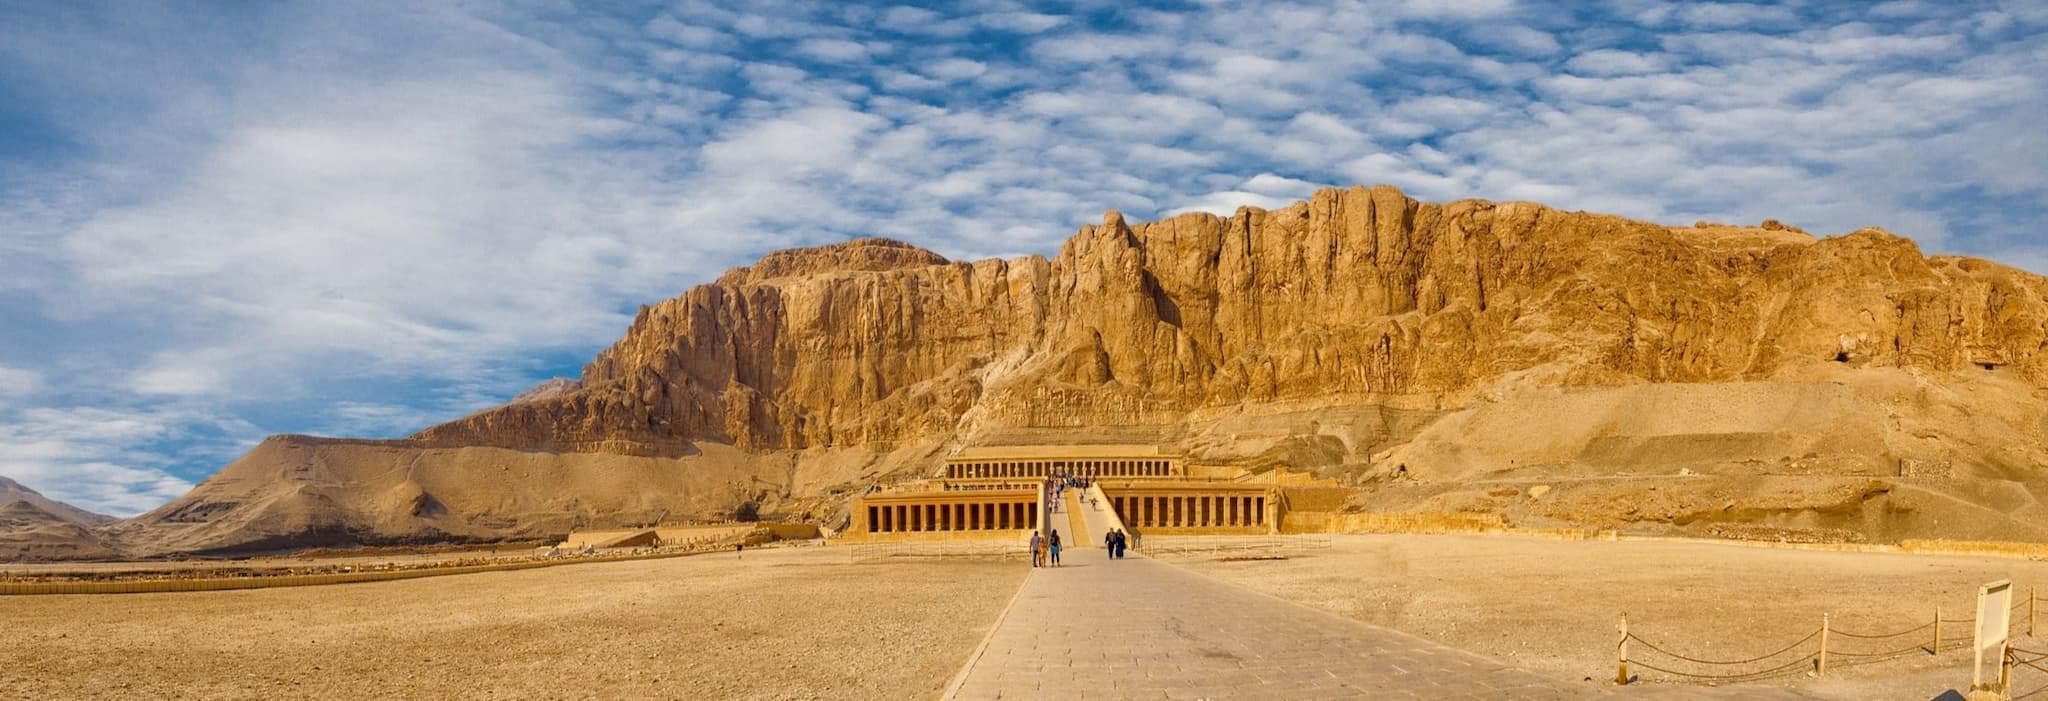 Valley of the Kings and Queens